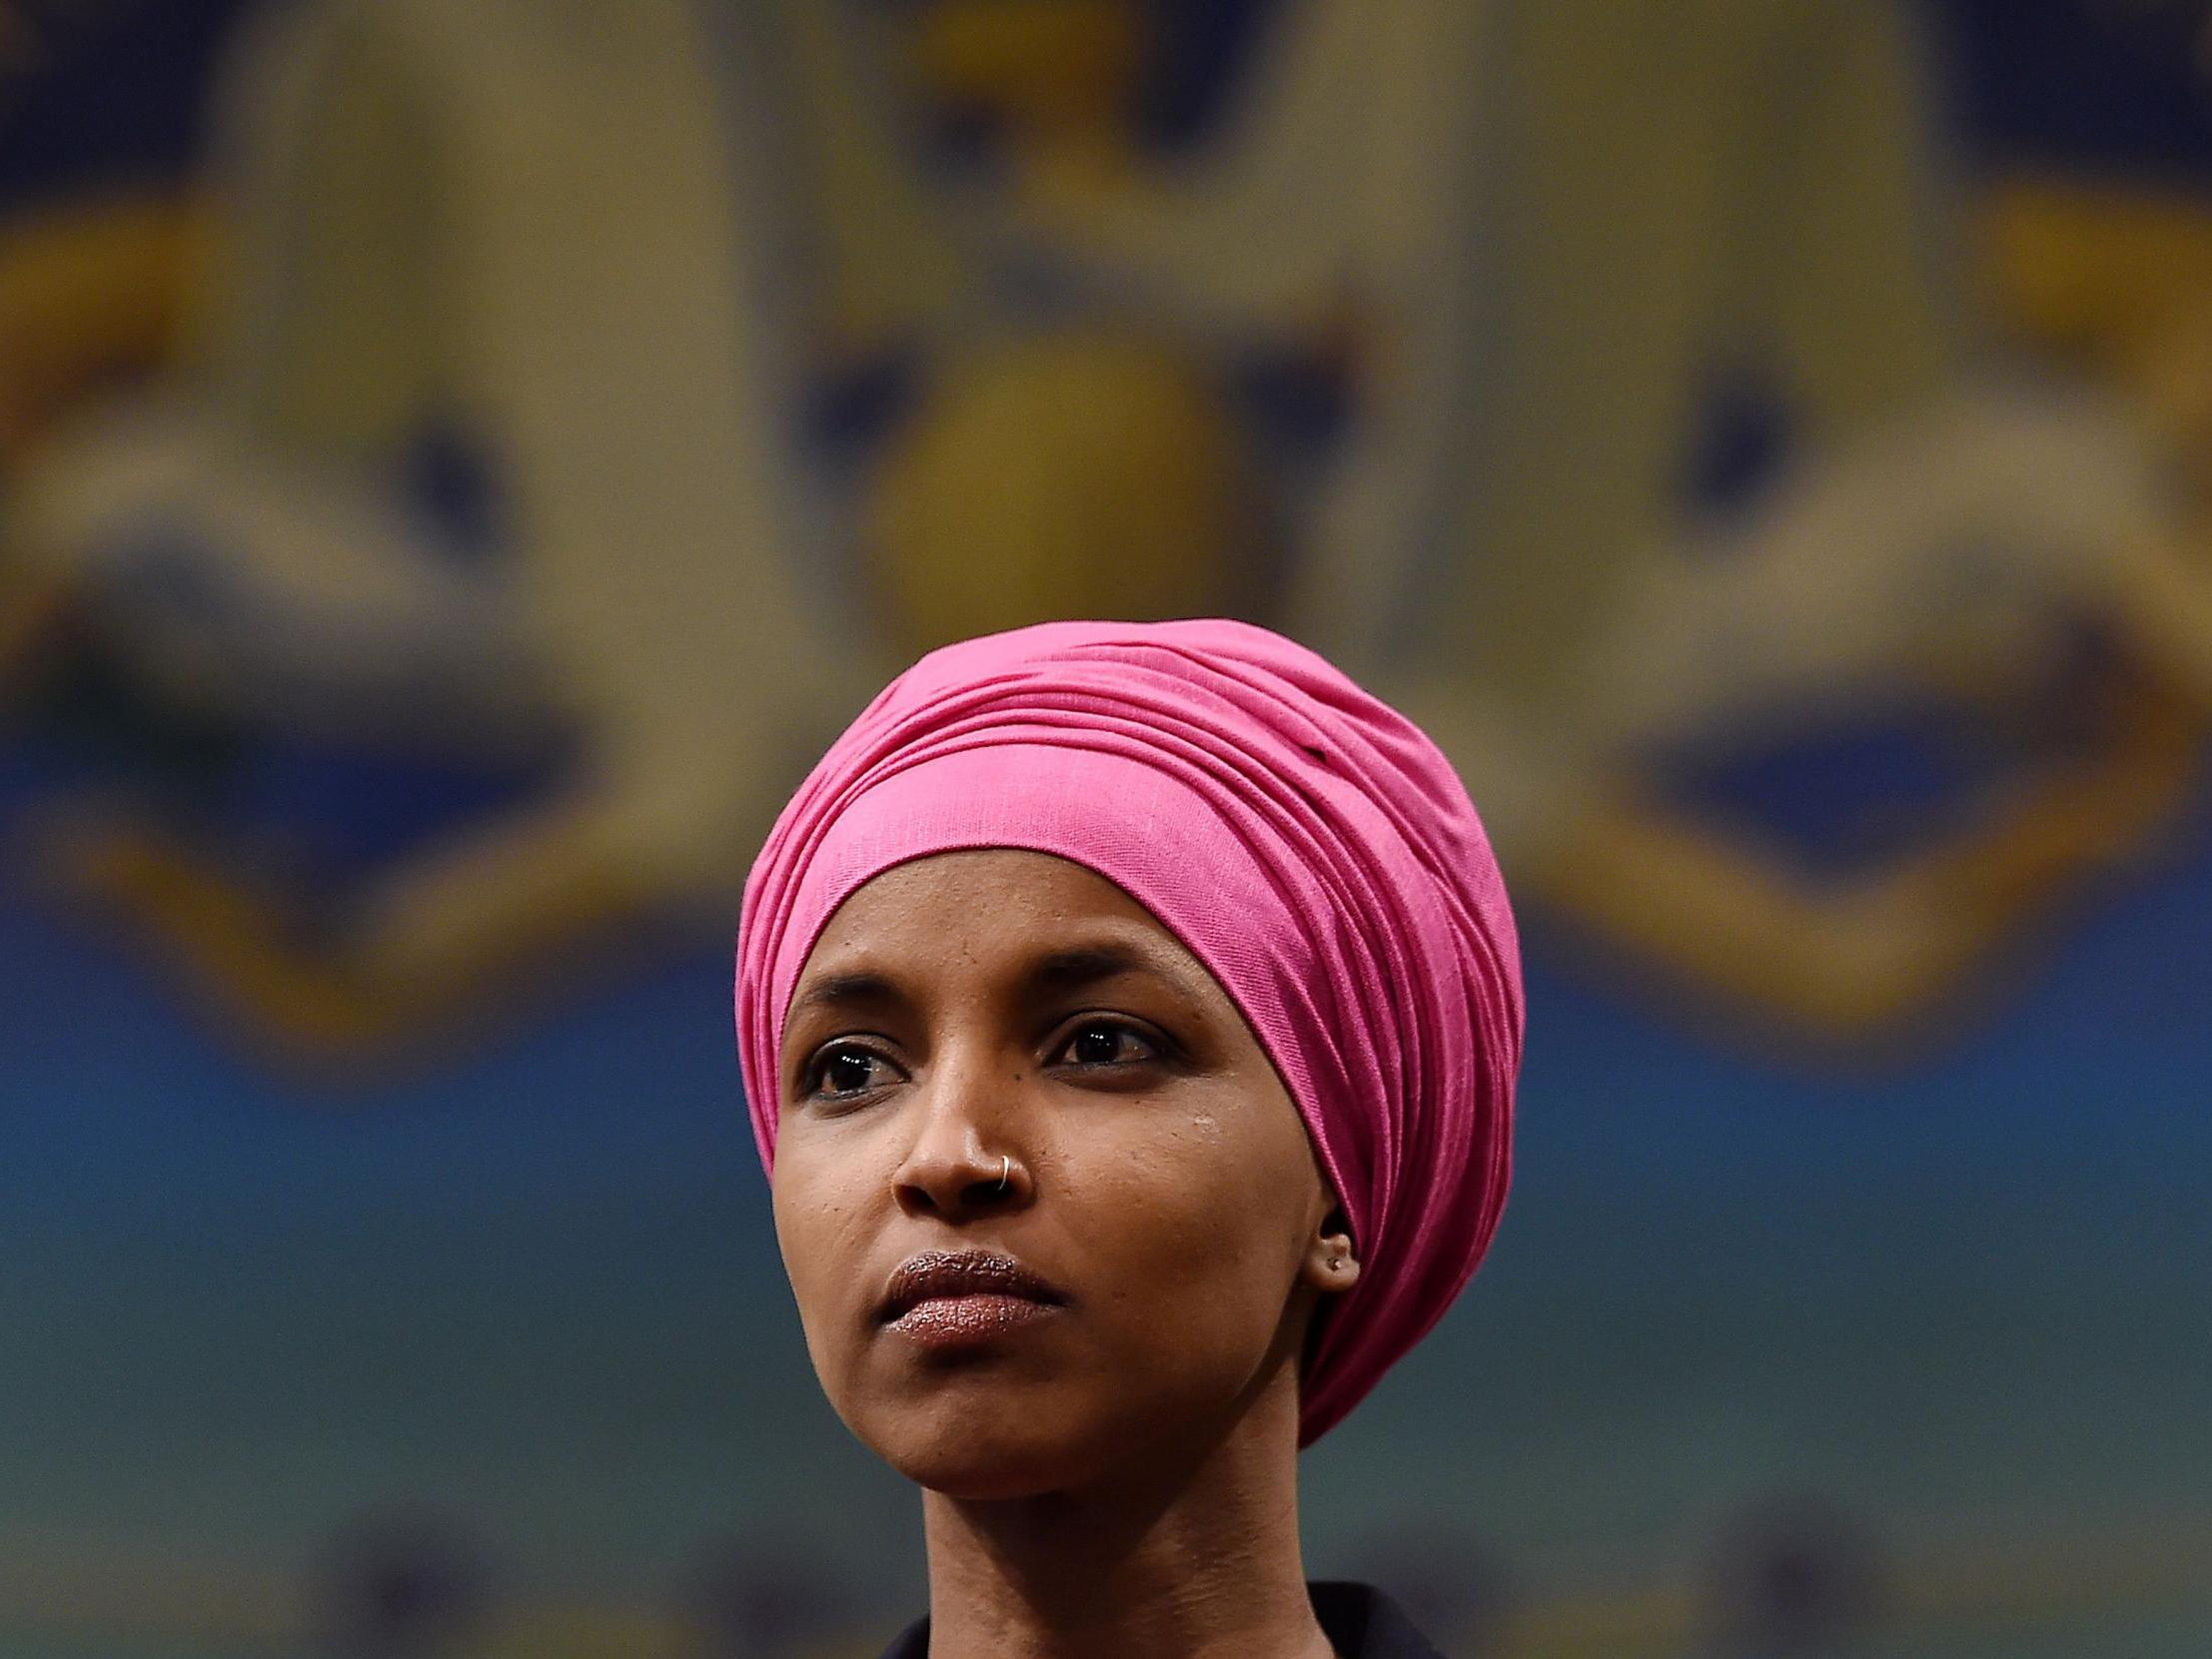 Omar called for compassion in a Twitter post in November